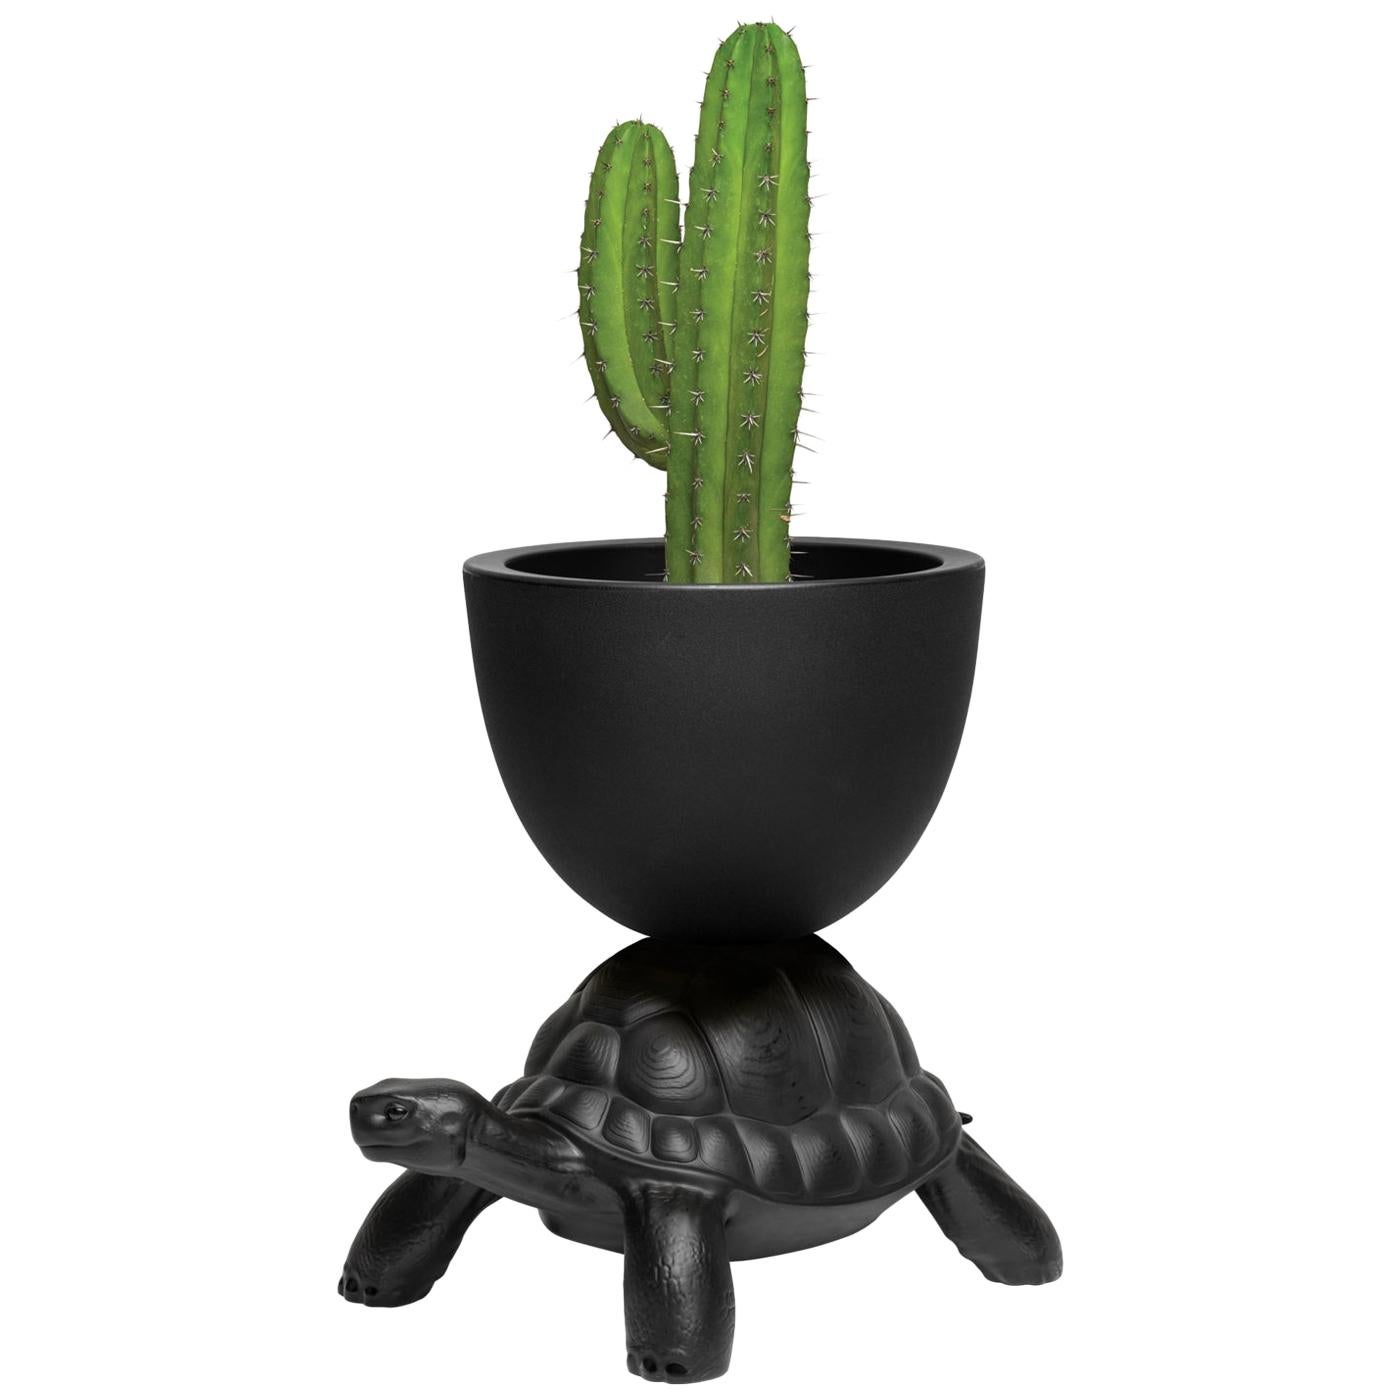 Black Turtle Carry Planter / Champagne Cooler, Designed by Marcantonio For Sale